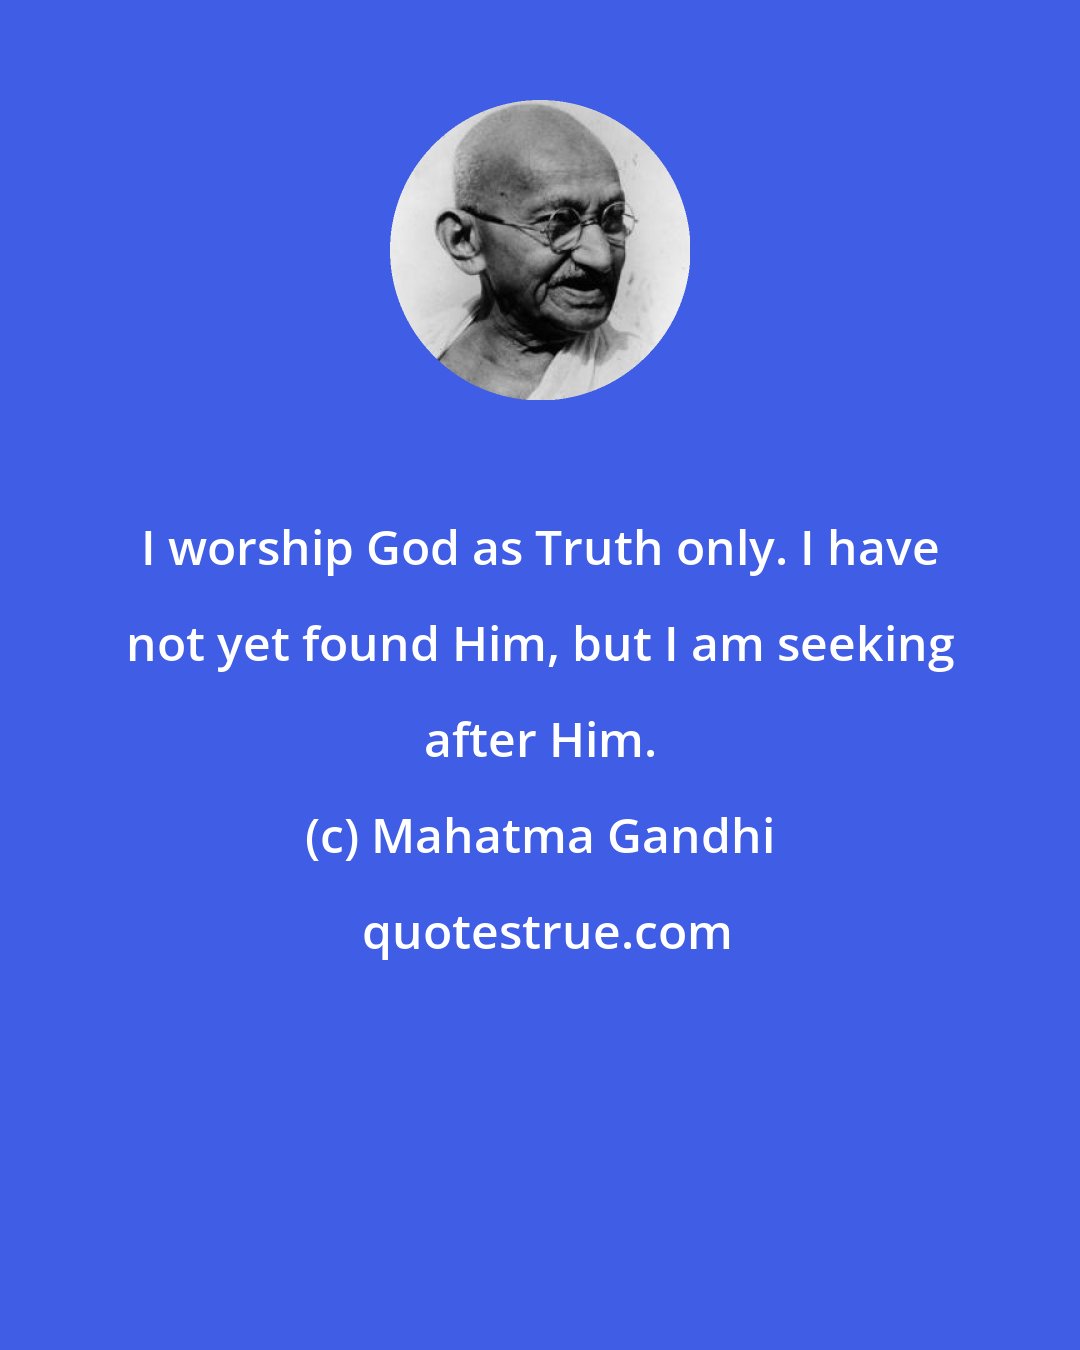 Mahatma Gandhi: I worship God as Truth only. I have not yet found Him, but I am seeking after Him.